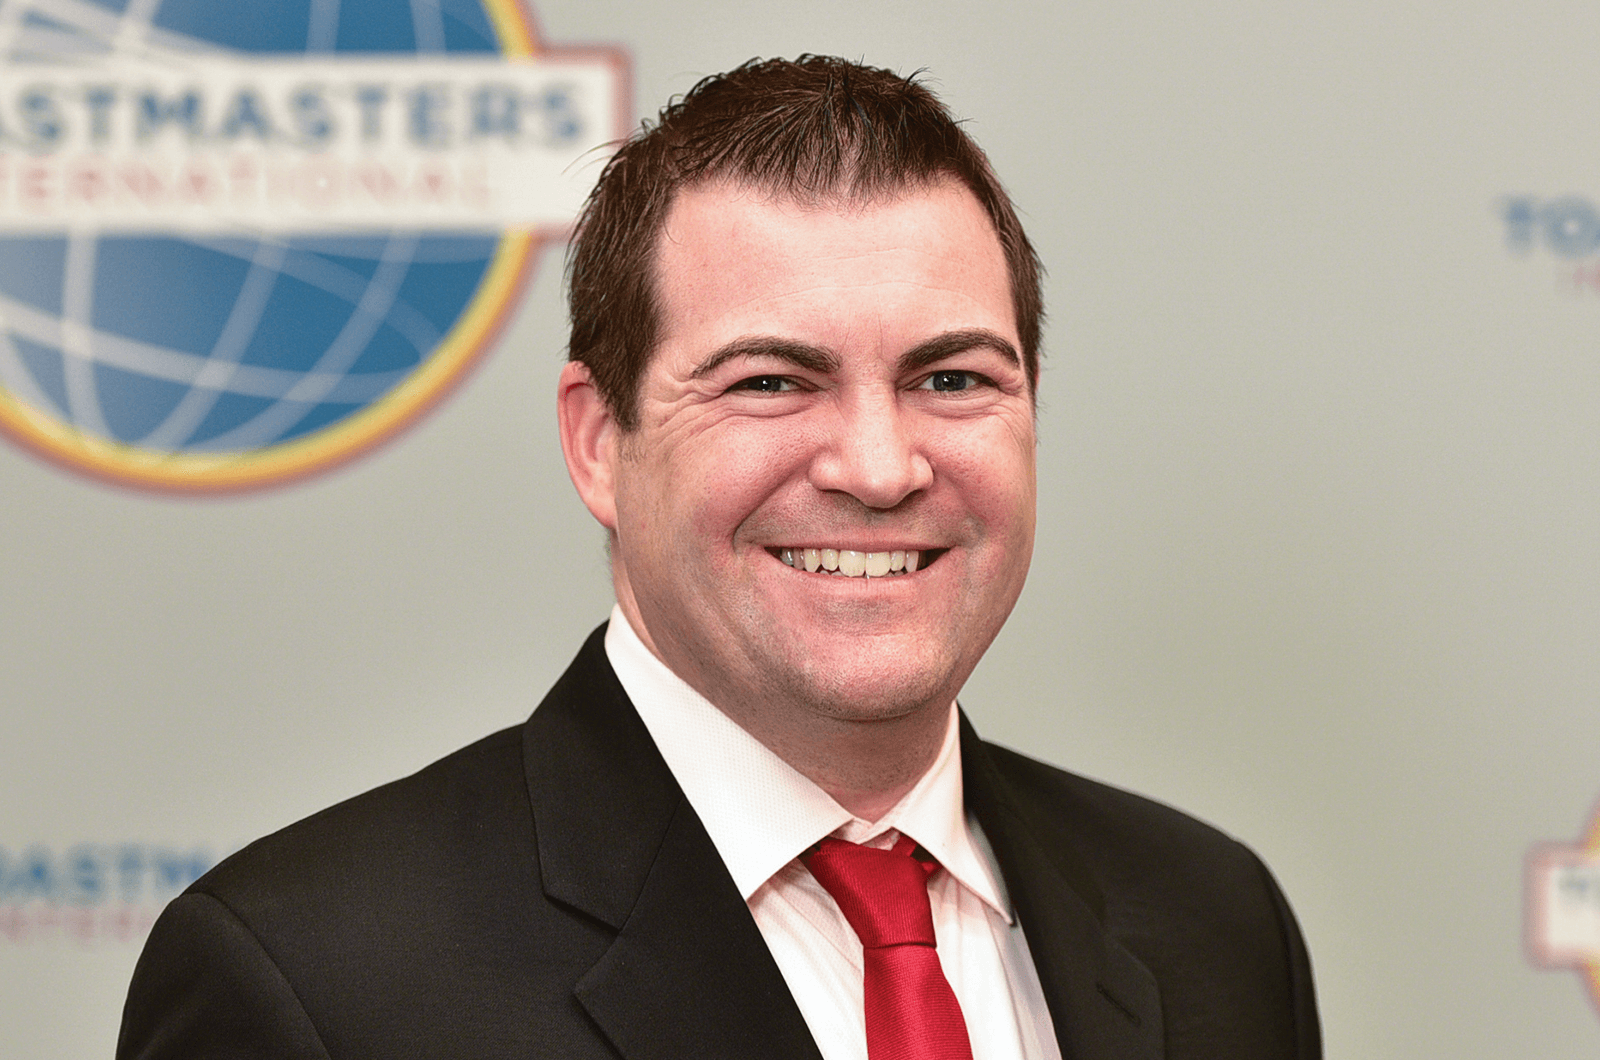 Man in suit jacket and red tie smiling